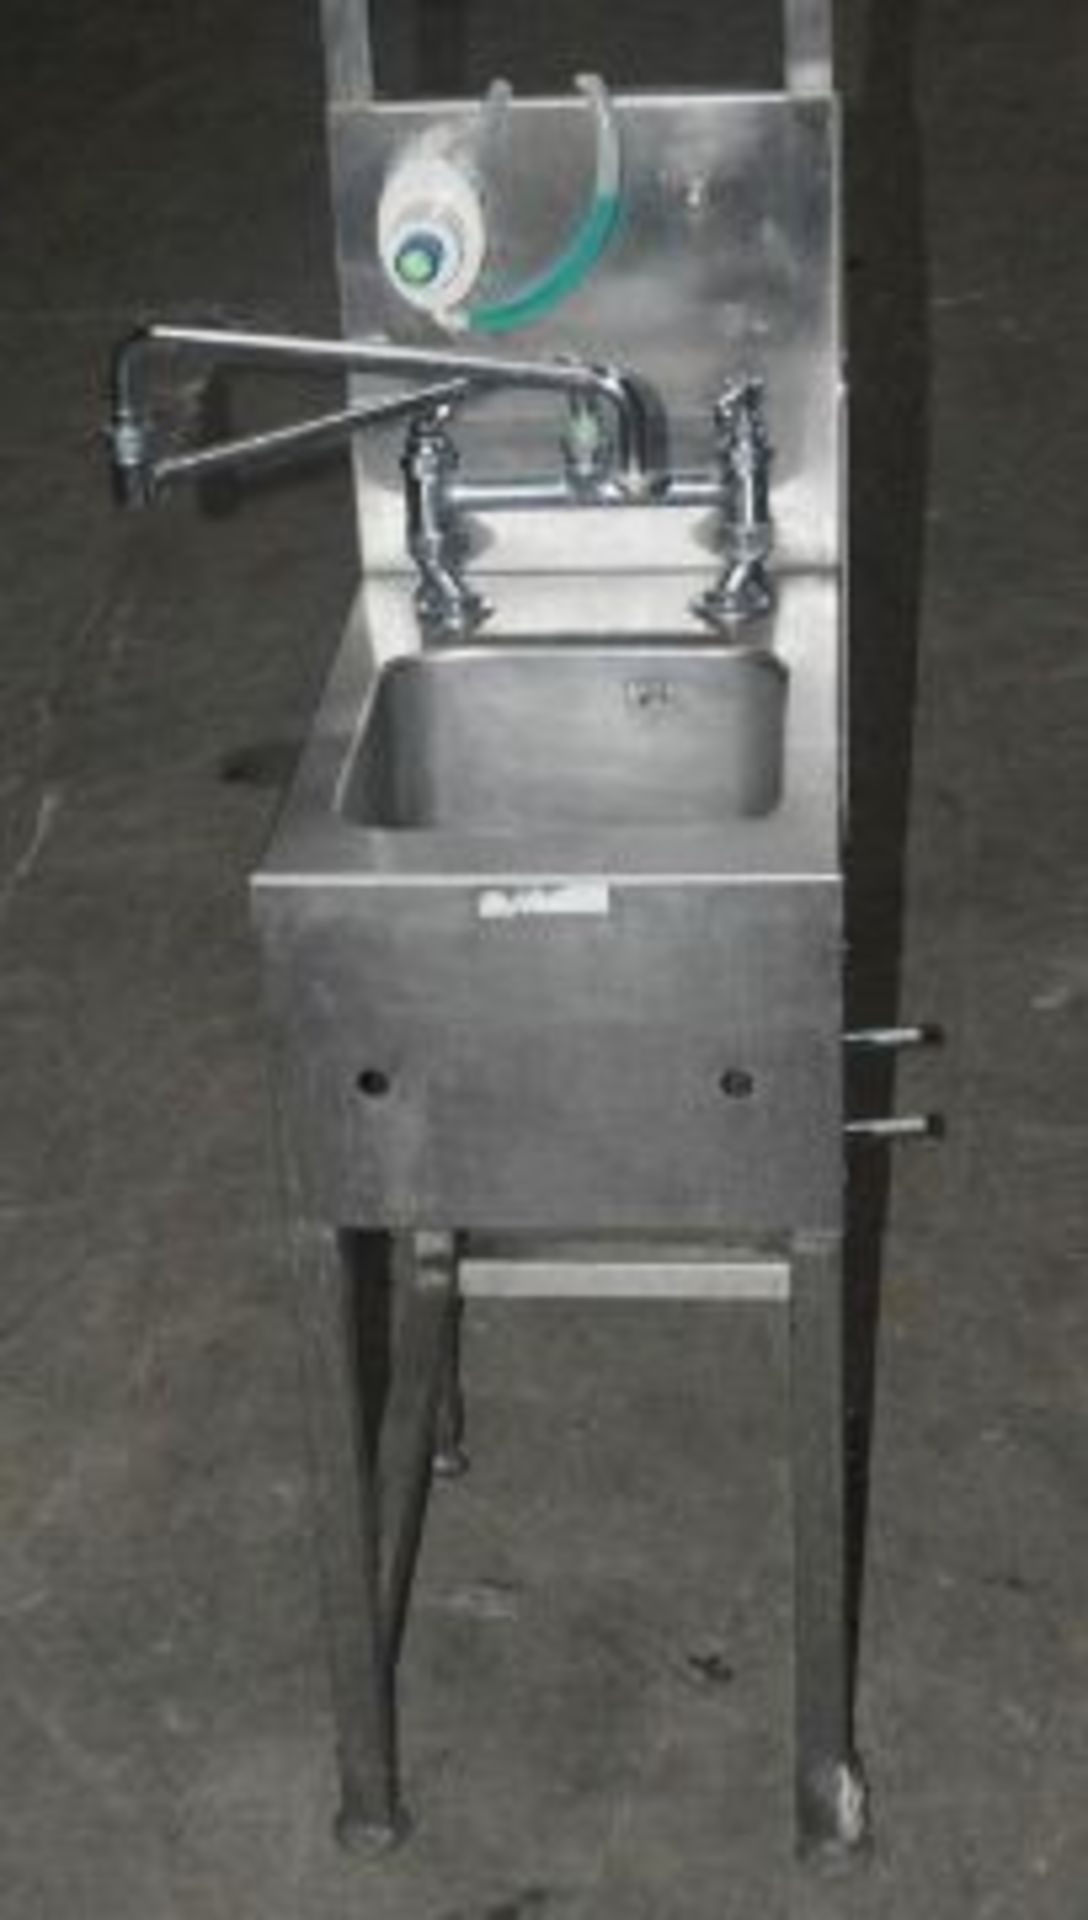 1 x Stainless Steel Commercial Kitchen Janitorial Mop / Cleaning Station - Dimensions: H187 x W33 - Image 6 of 6